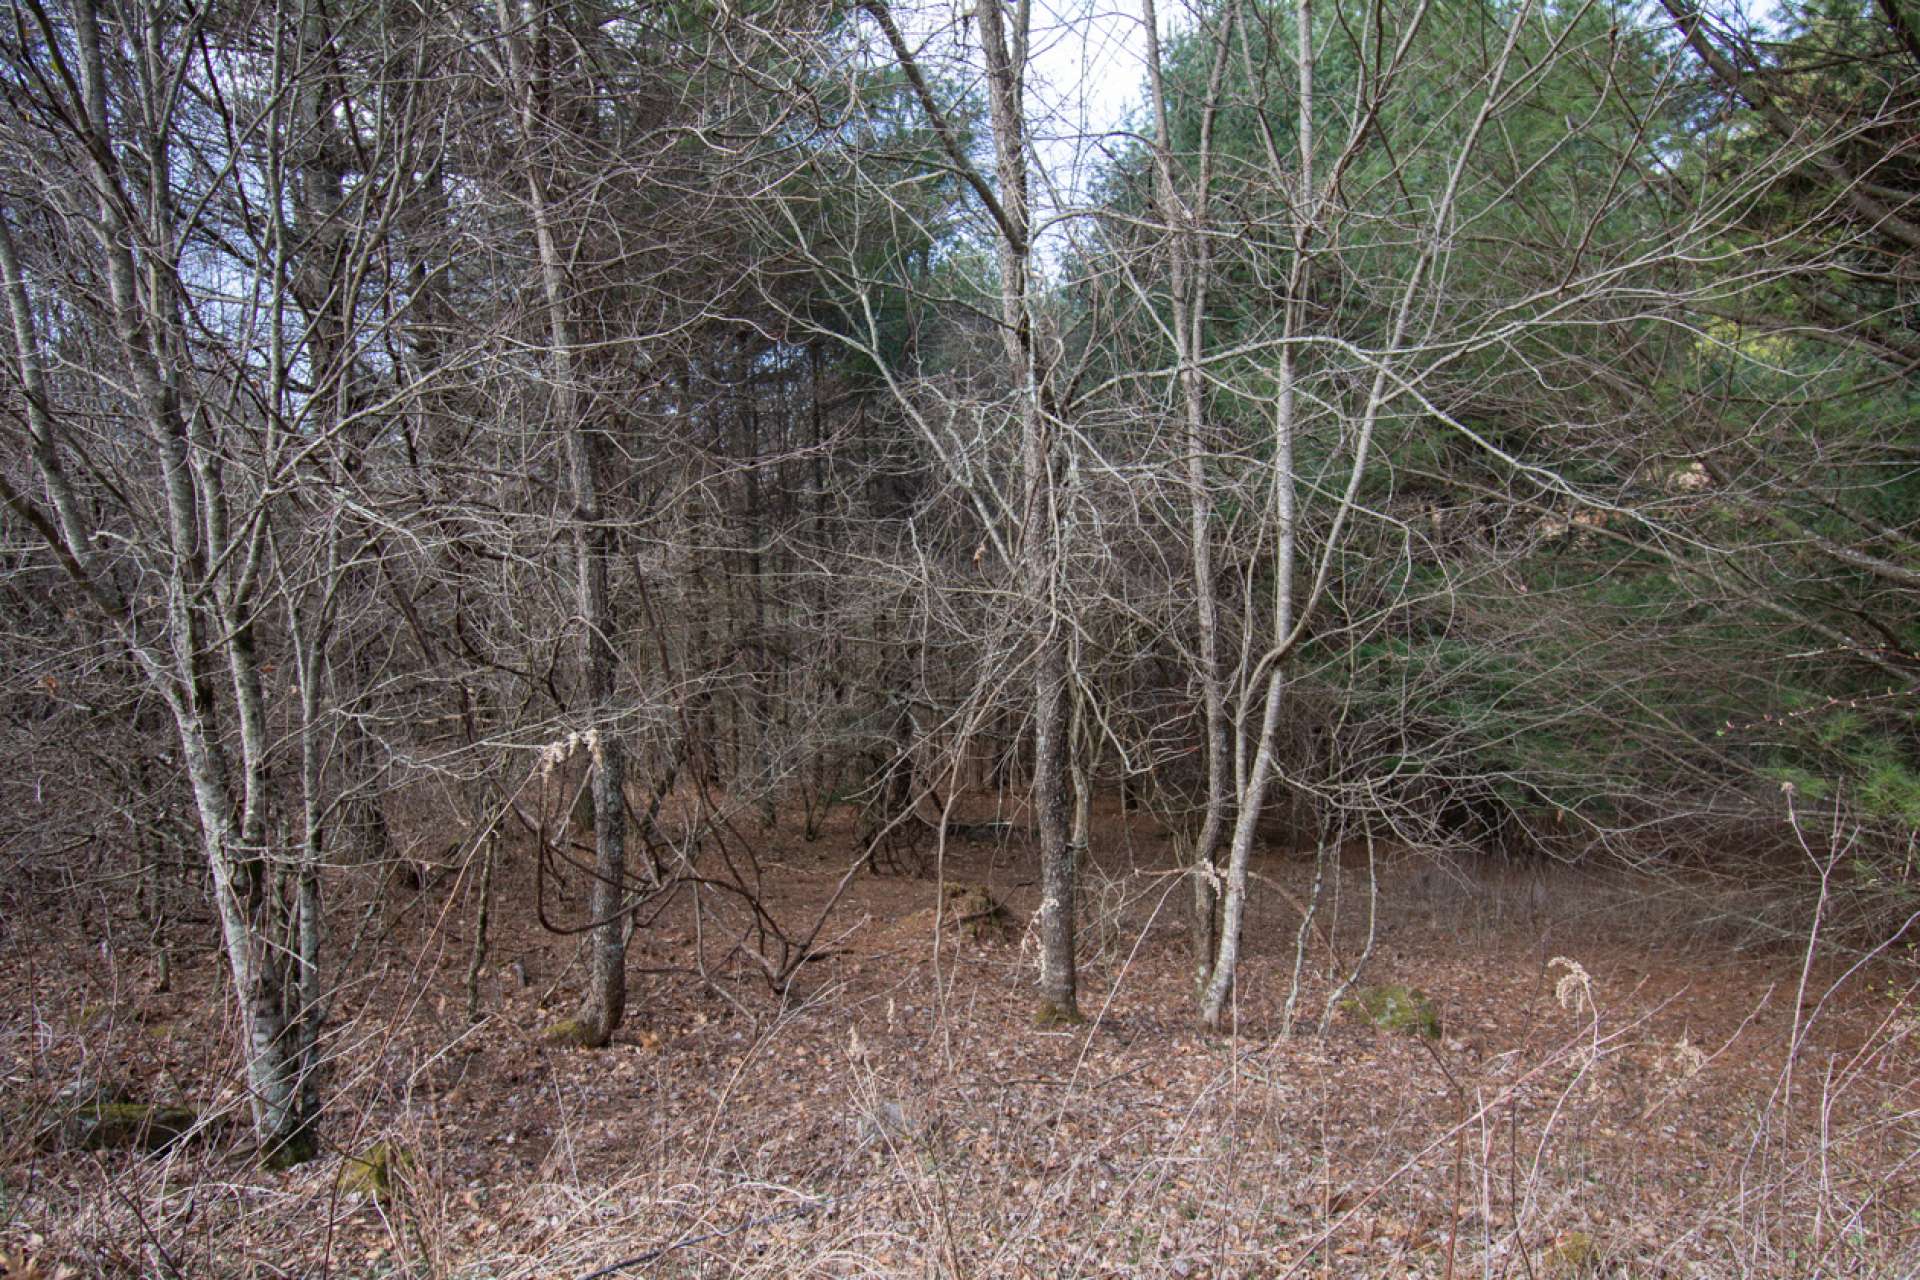 The terrain is wooded and gently sloping.